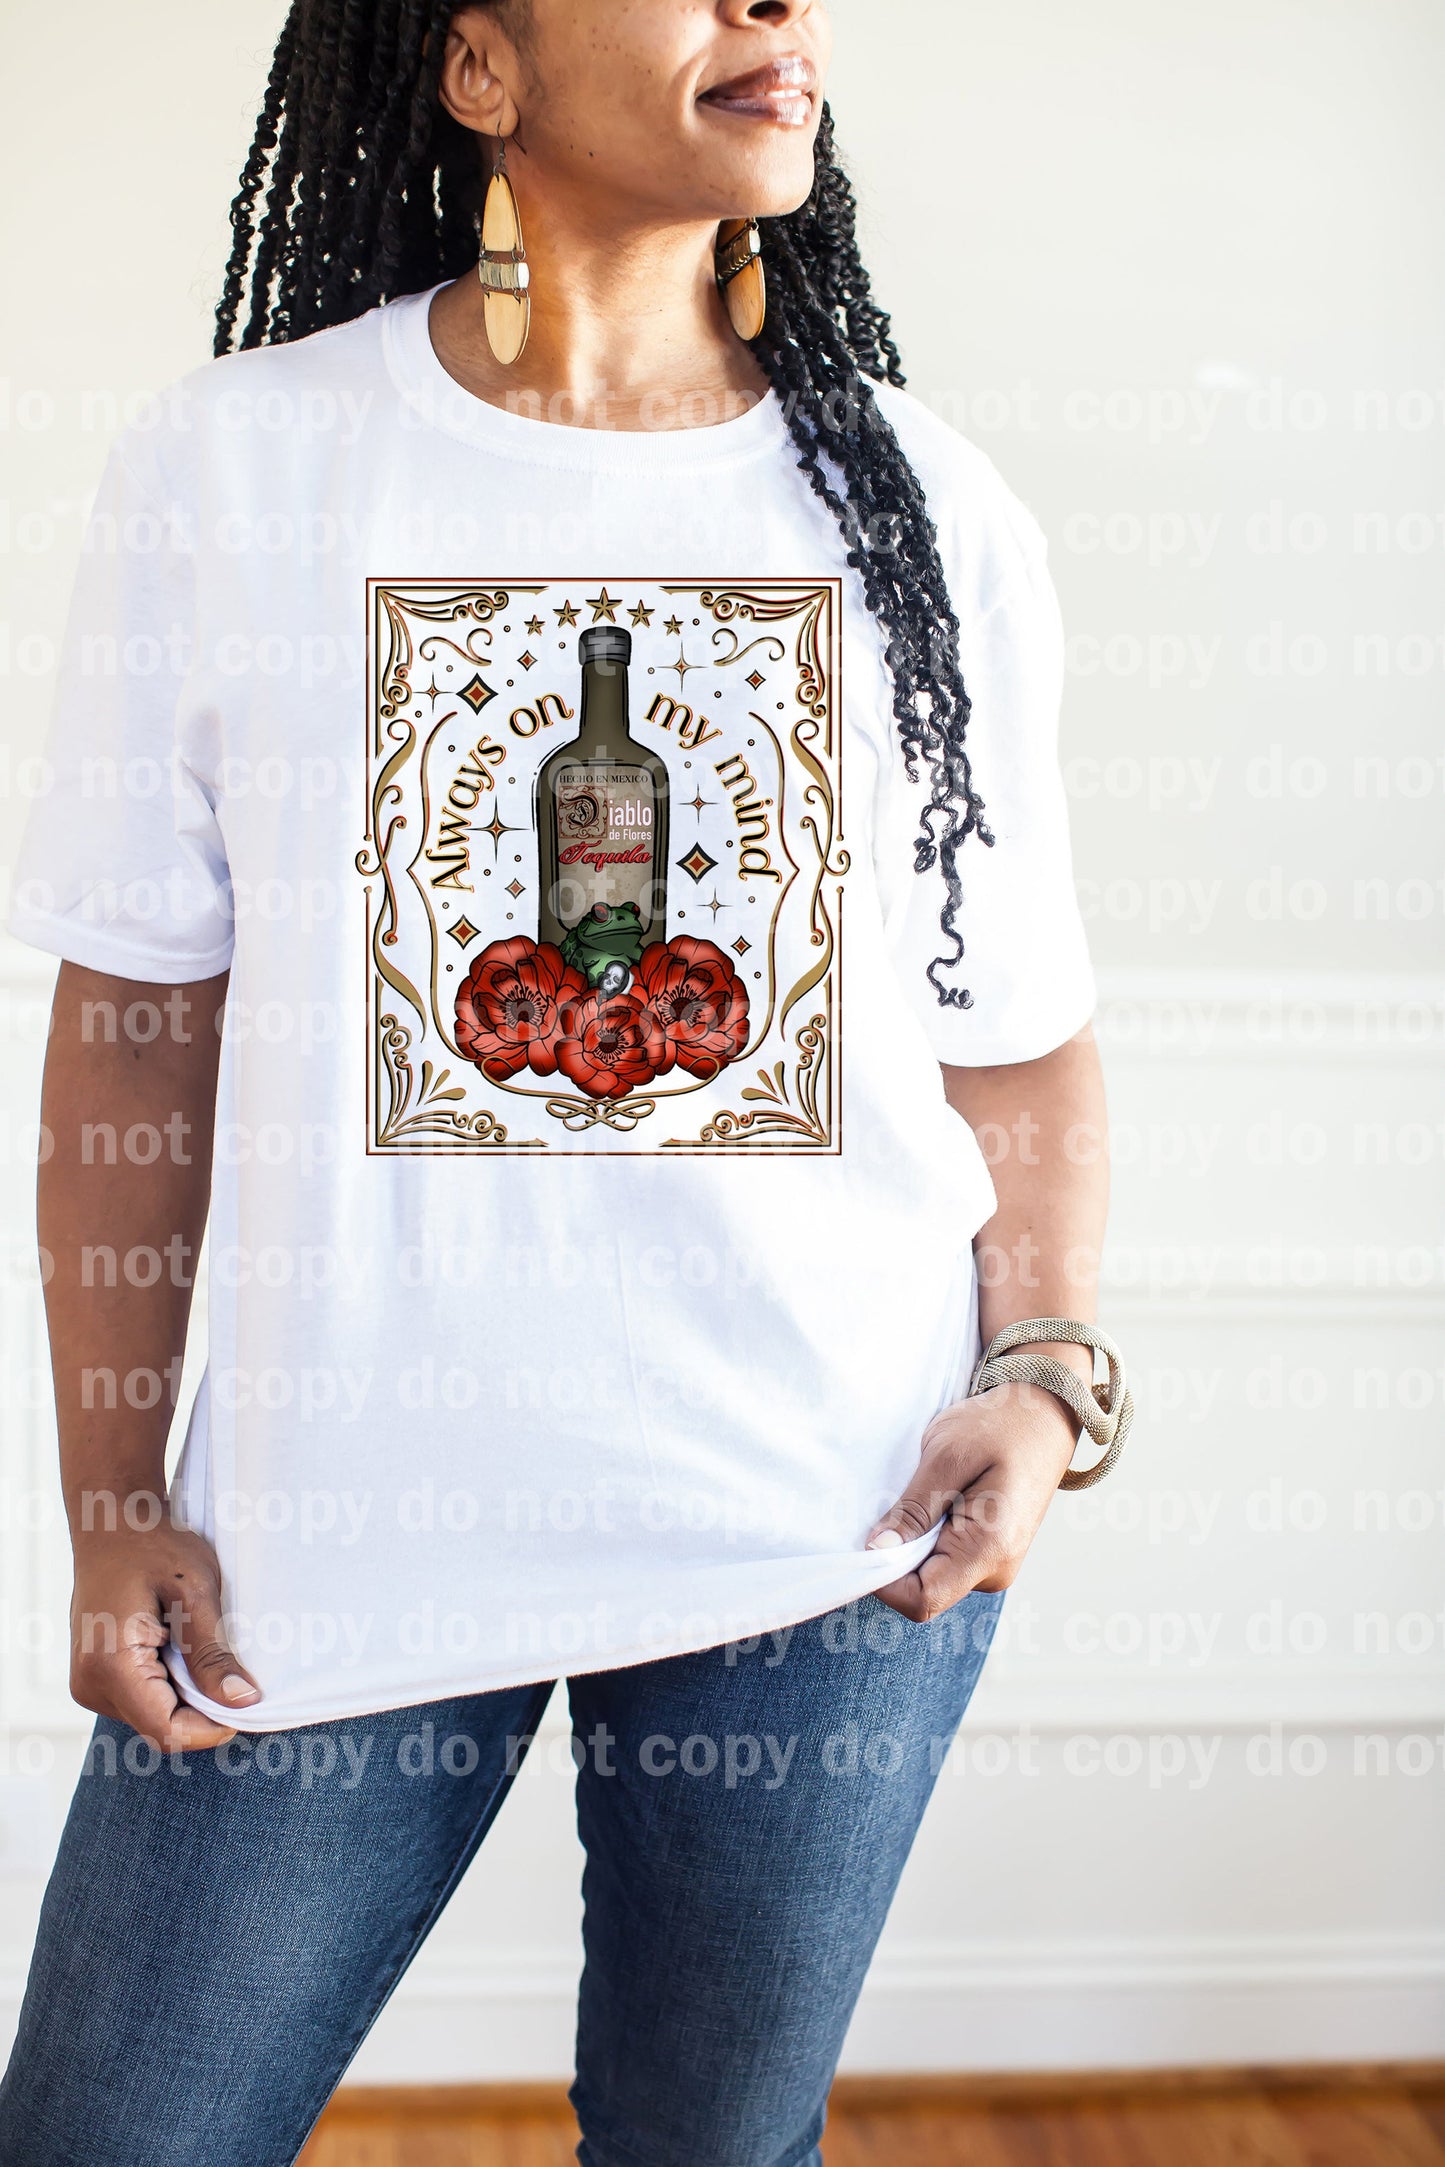 Always On My Mind Tequila with Optional Sleeve Design Dream Print or Sublimation Print